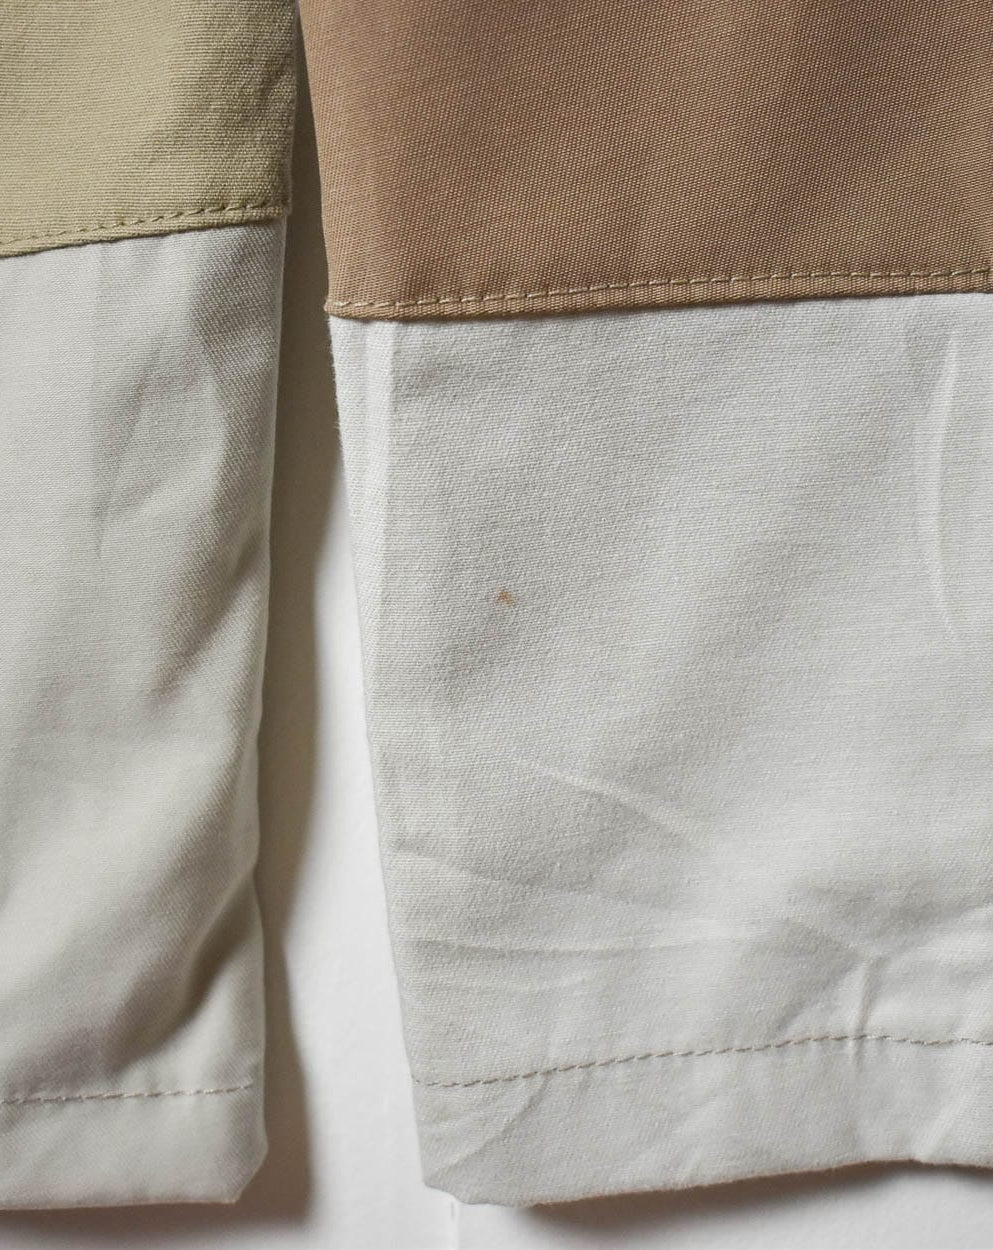 Neutral Reworked Baggy Cargo Trousers - W36 L29